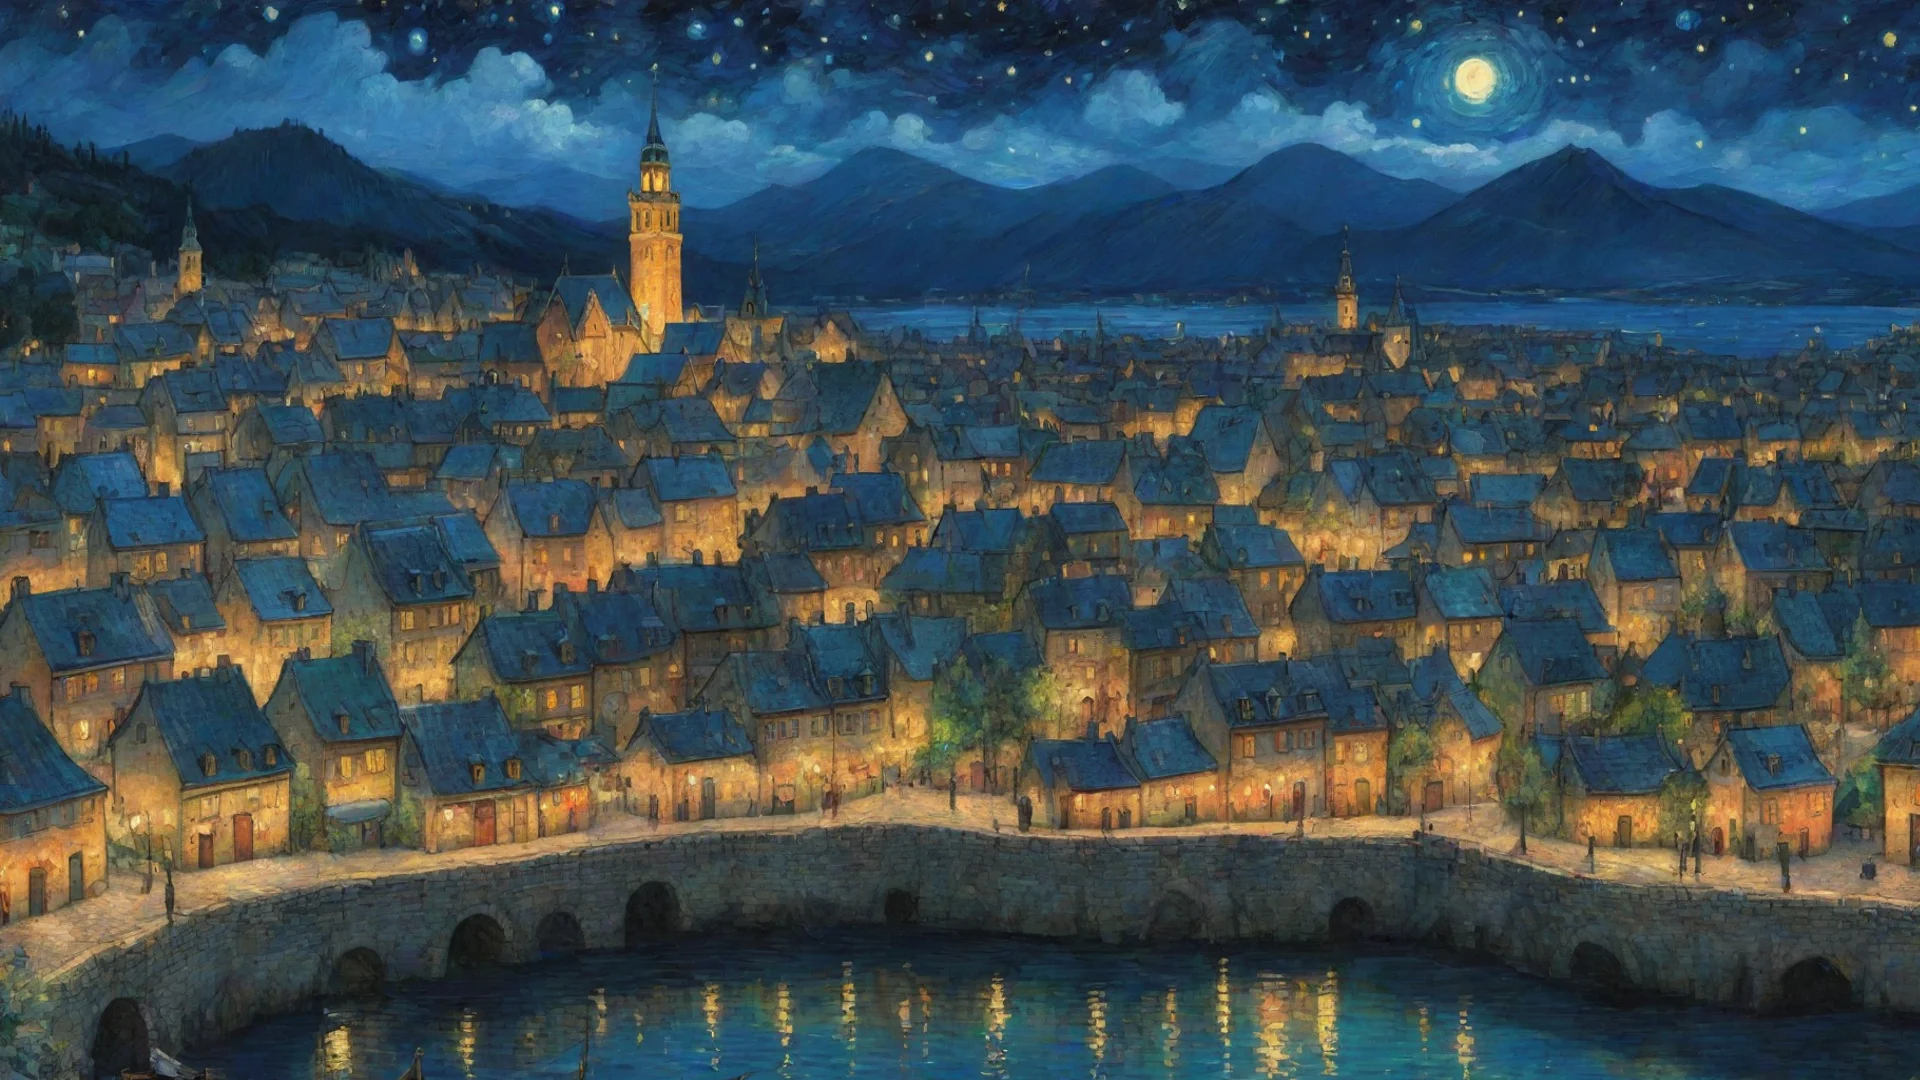 aiartstation art town lit up at night sky epic lovely artistic ghibli van gogh happyness bliss peace  detailed asthetic hd wow confident engaging wow 3 wide